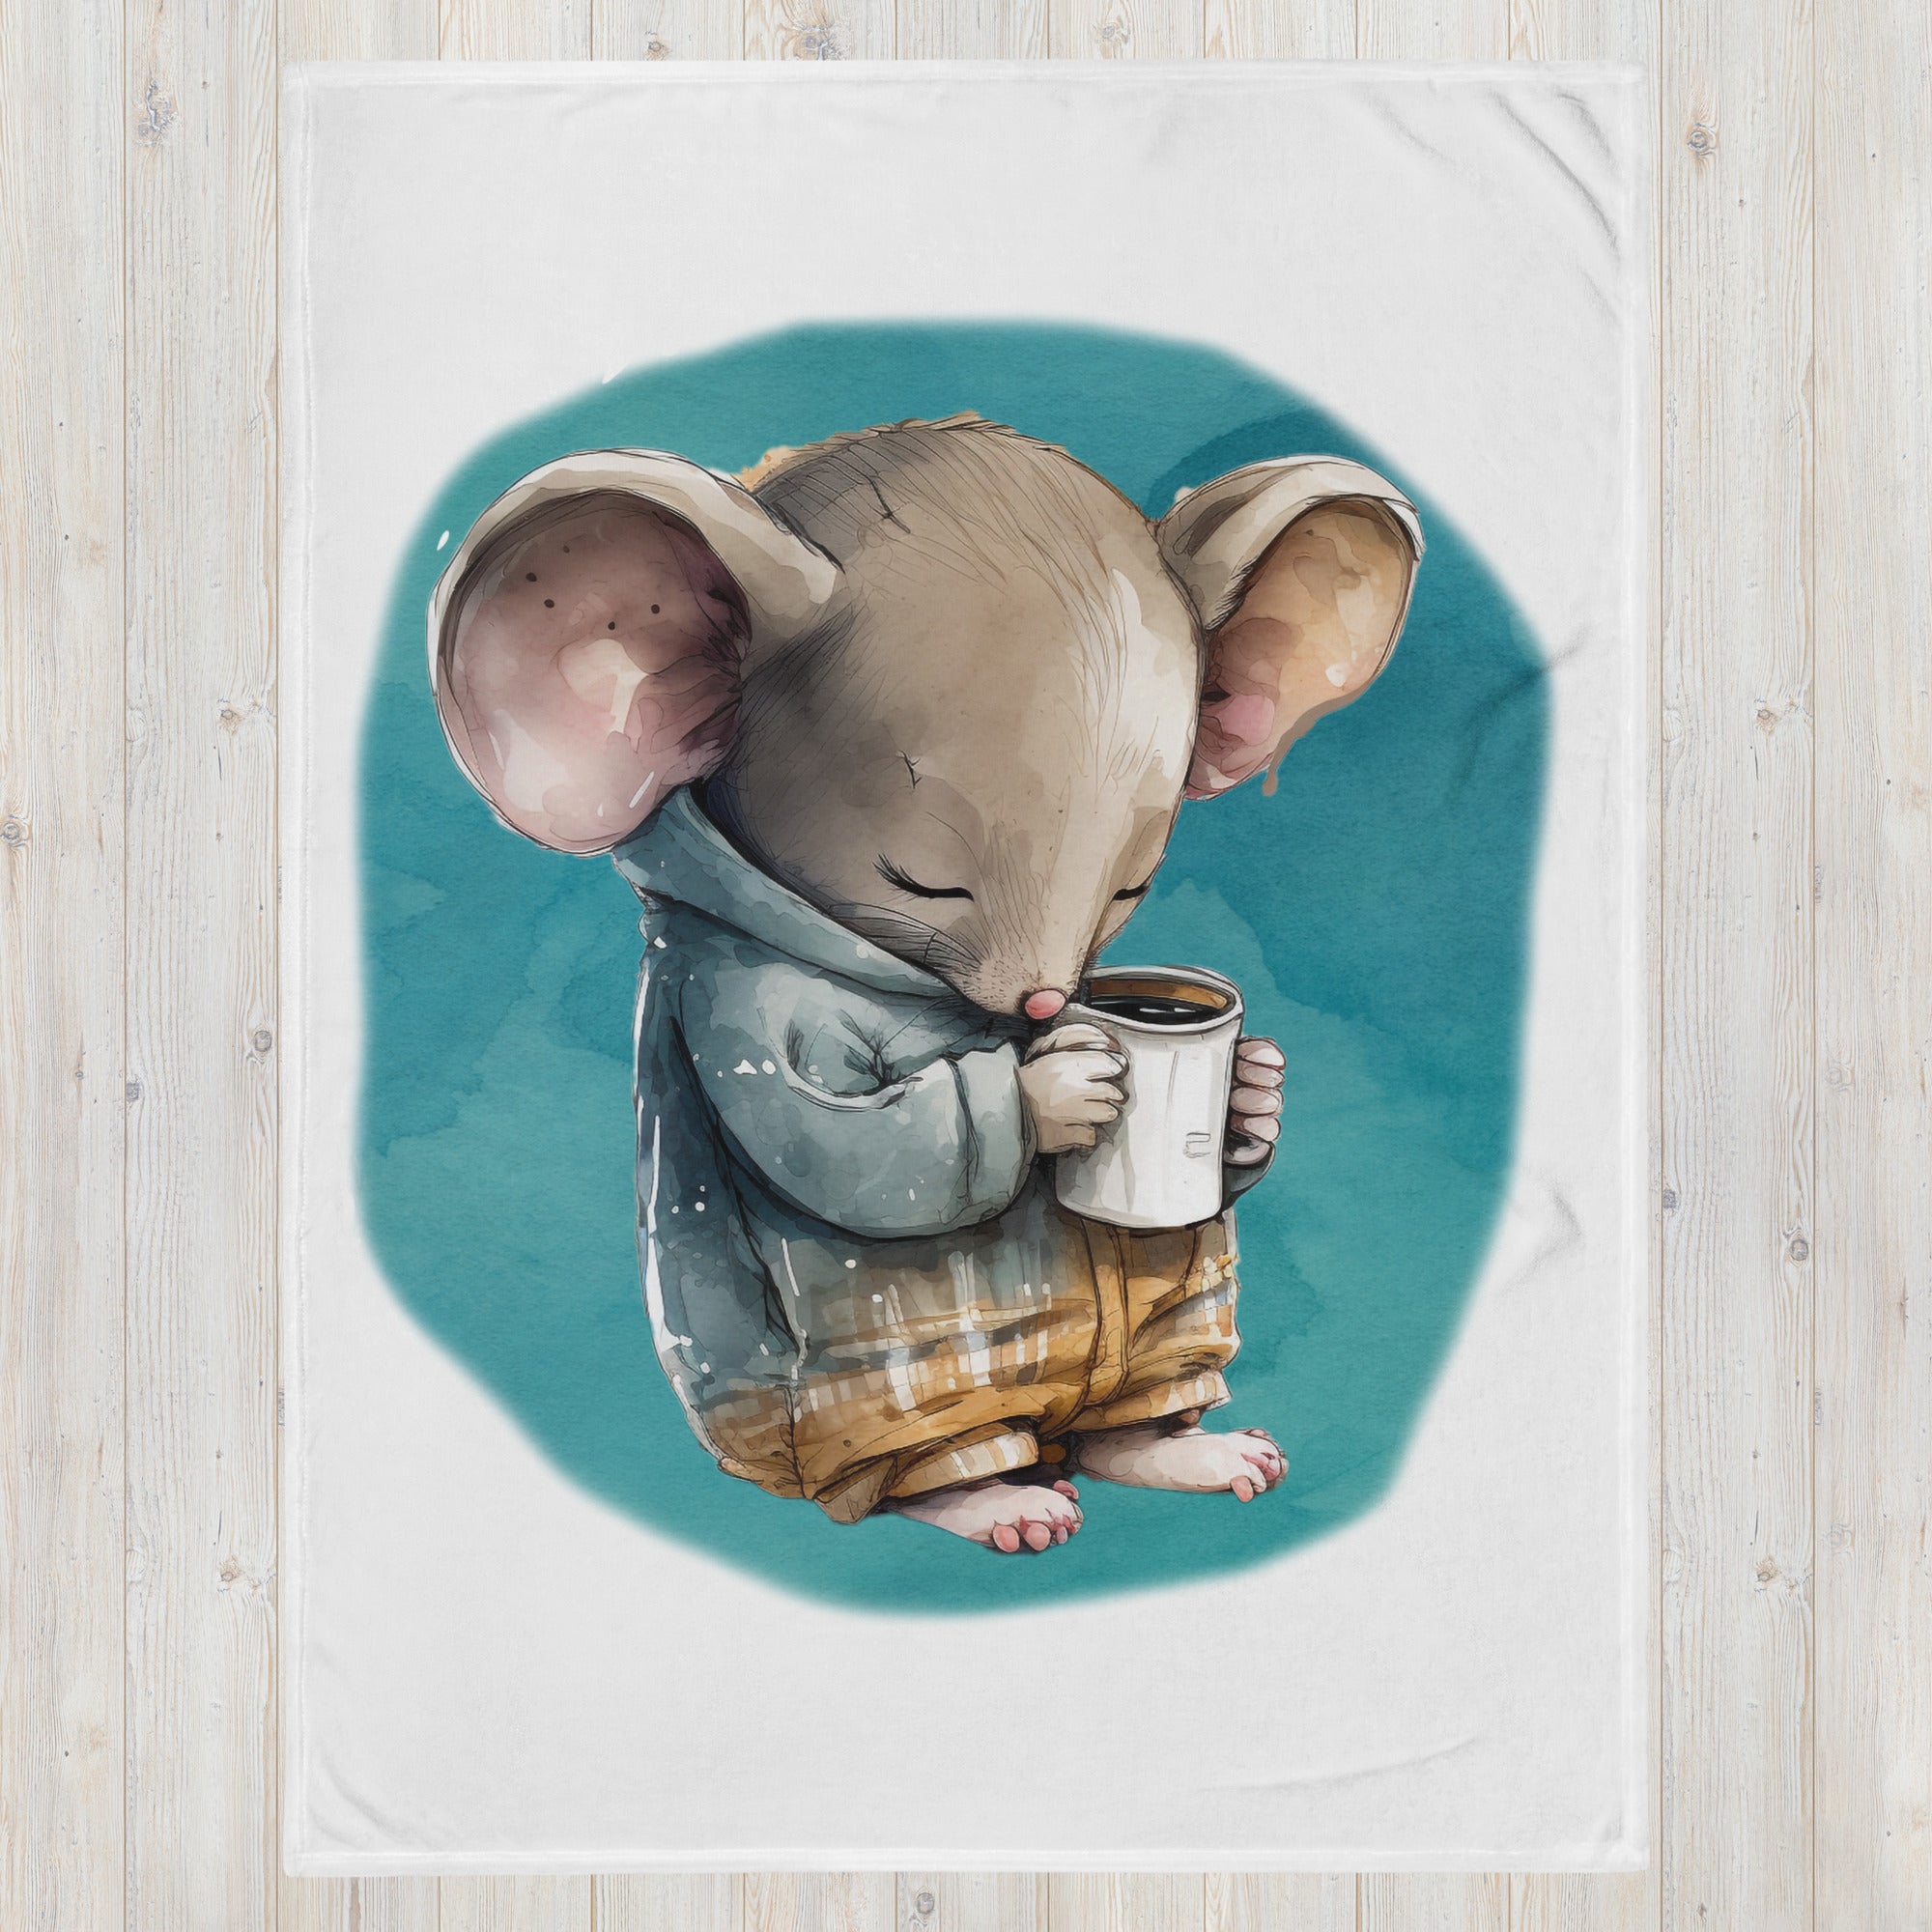 Sleepy Mouse 100% Polyester Soft Silk Touch Fabric Throw Blanket - Cozy, Durable and Adorable